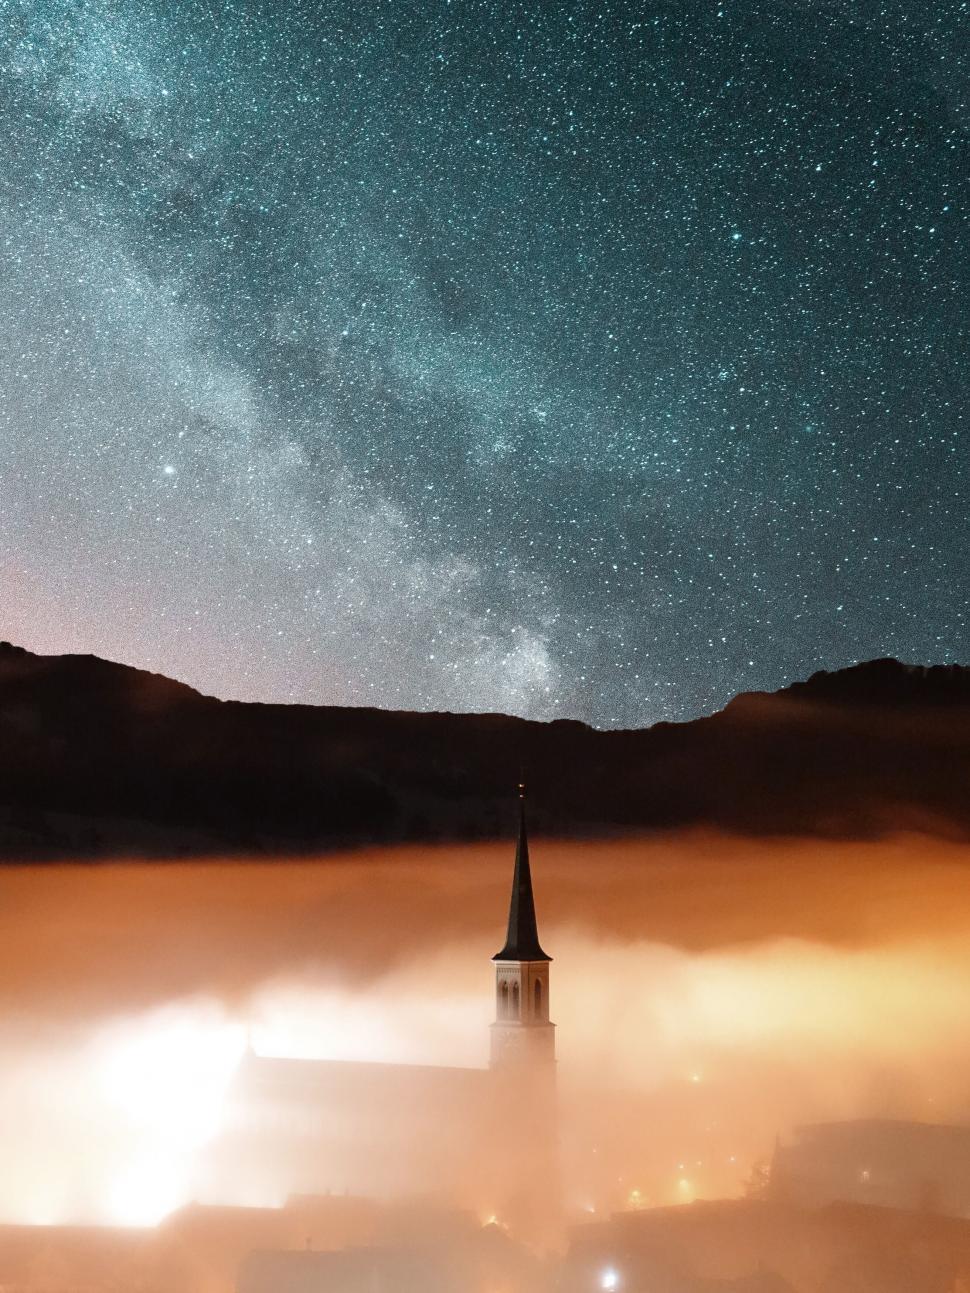 Free Image of Church spire under fog with Milky Way backdrop 